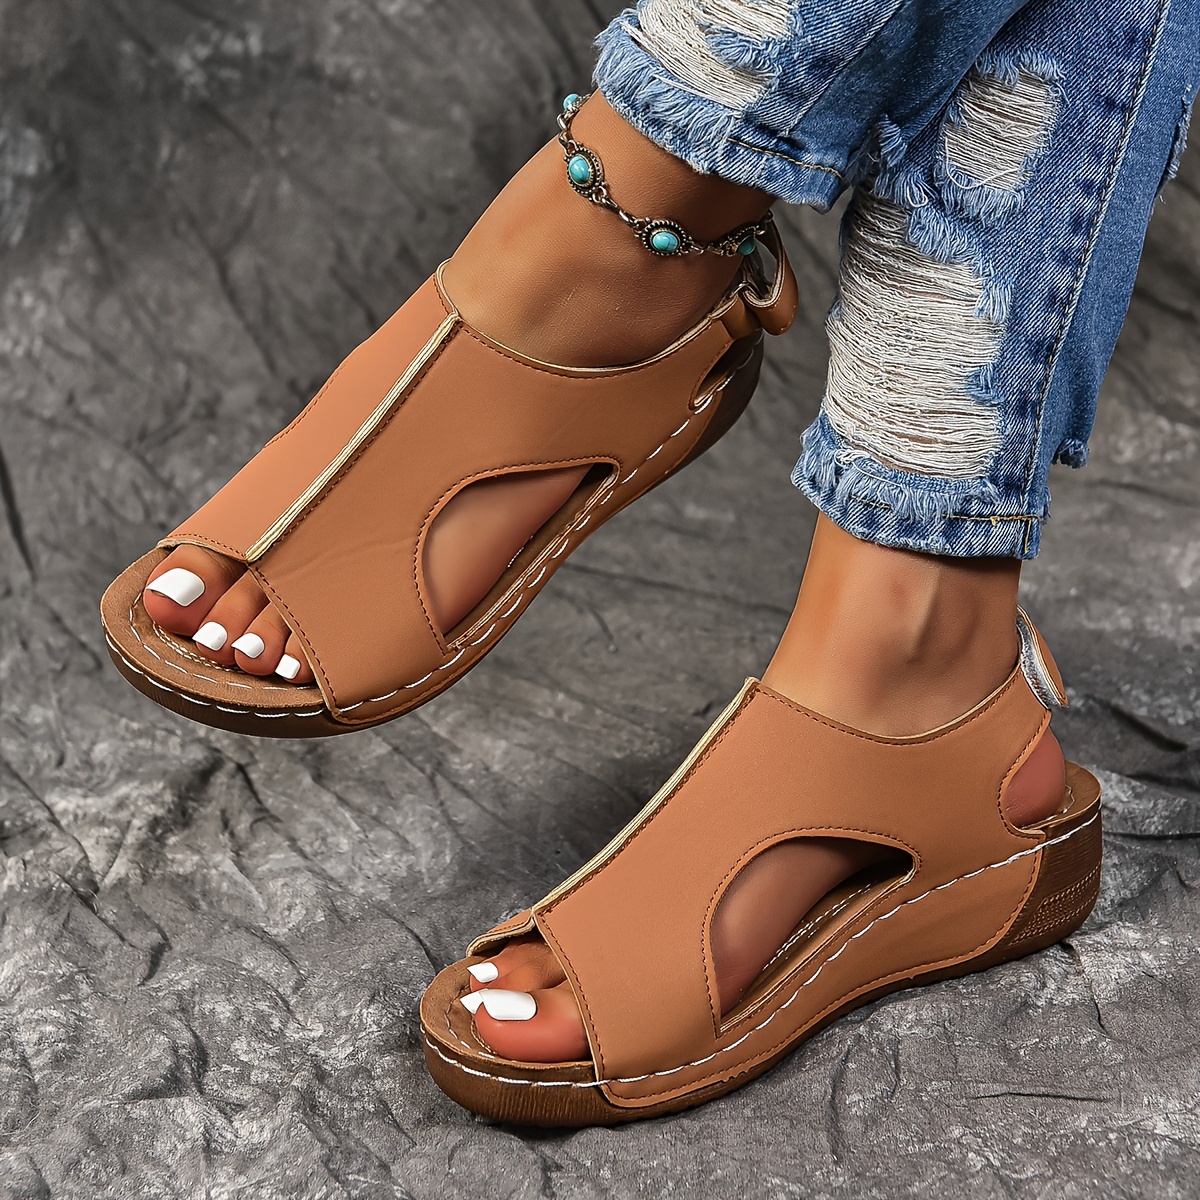 women s solid color wedge heeled sandals casual open toe details 23